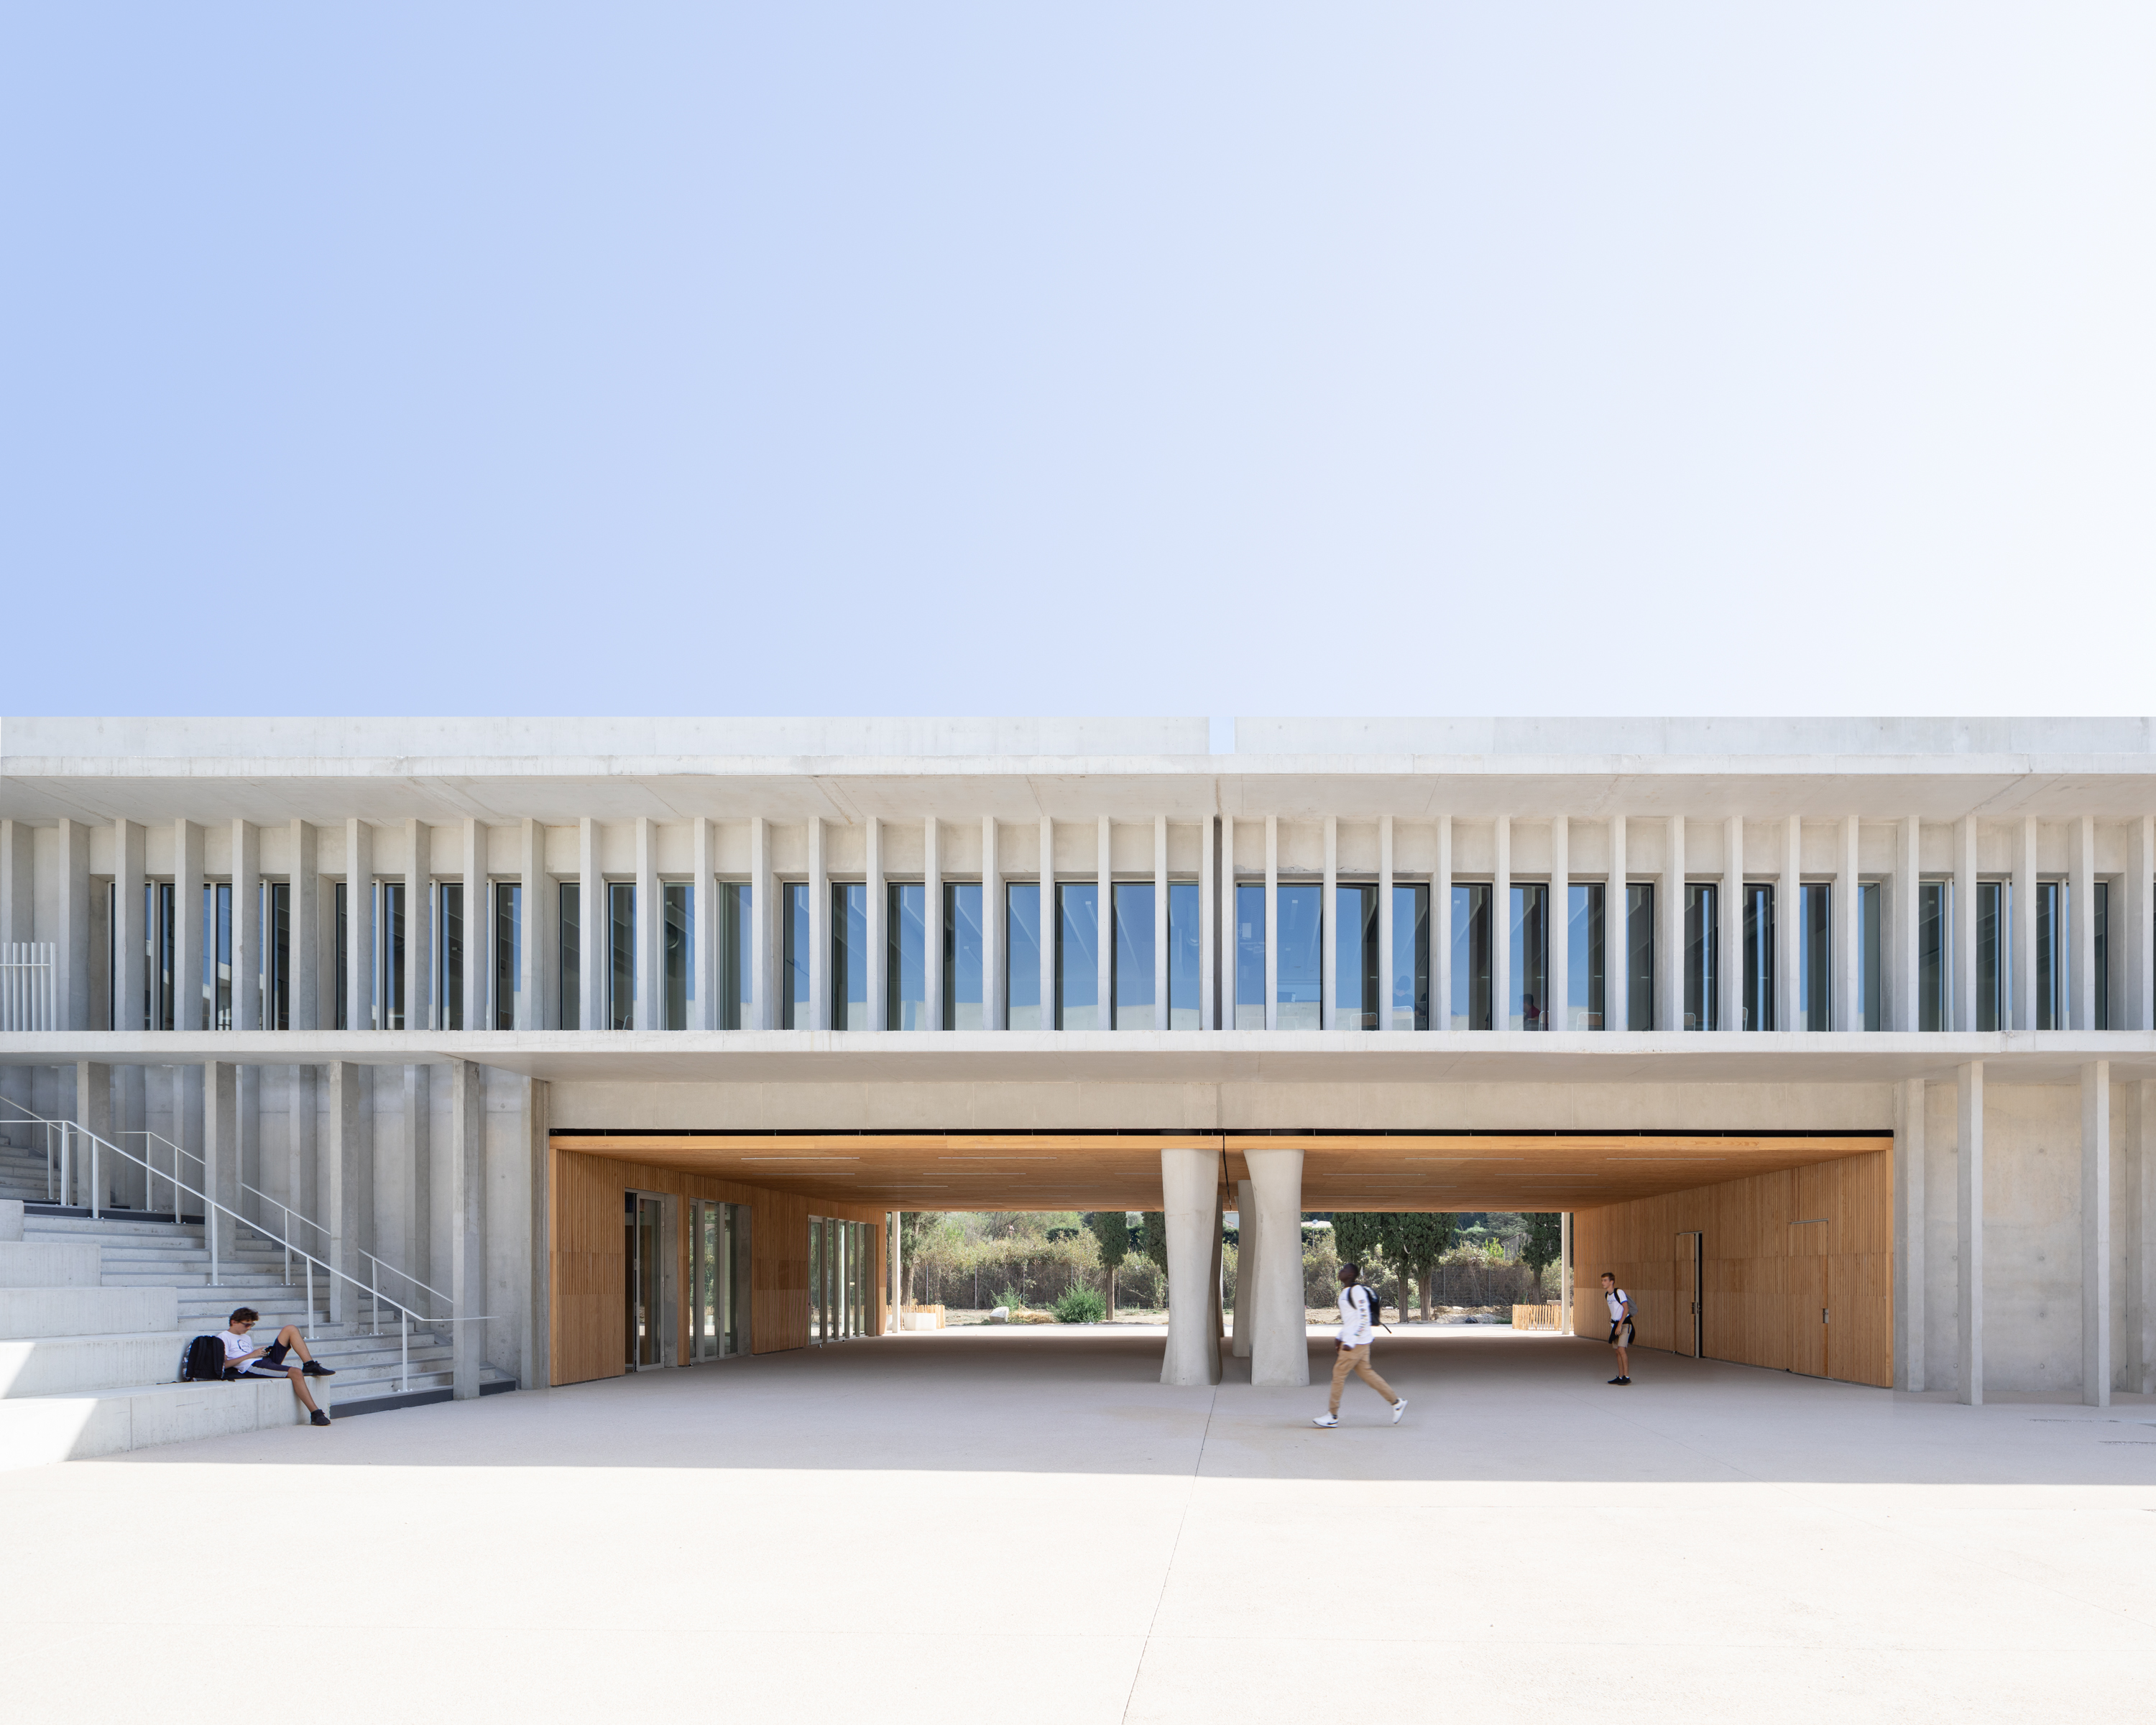 Laudescher’s wood solutions perfect the ethereal and rhythmic architectural composition of the Châteaurenard High School-0